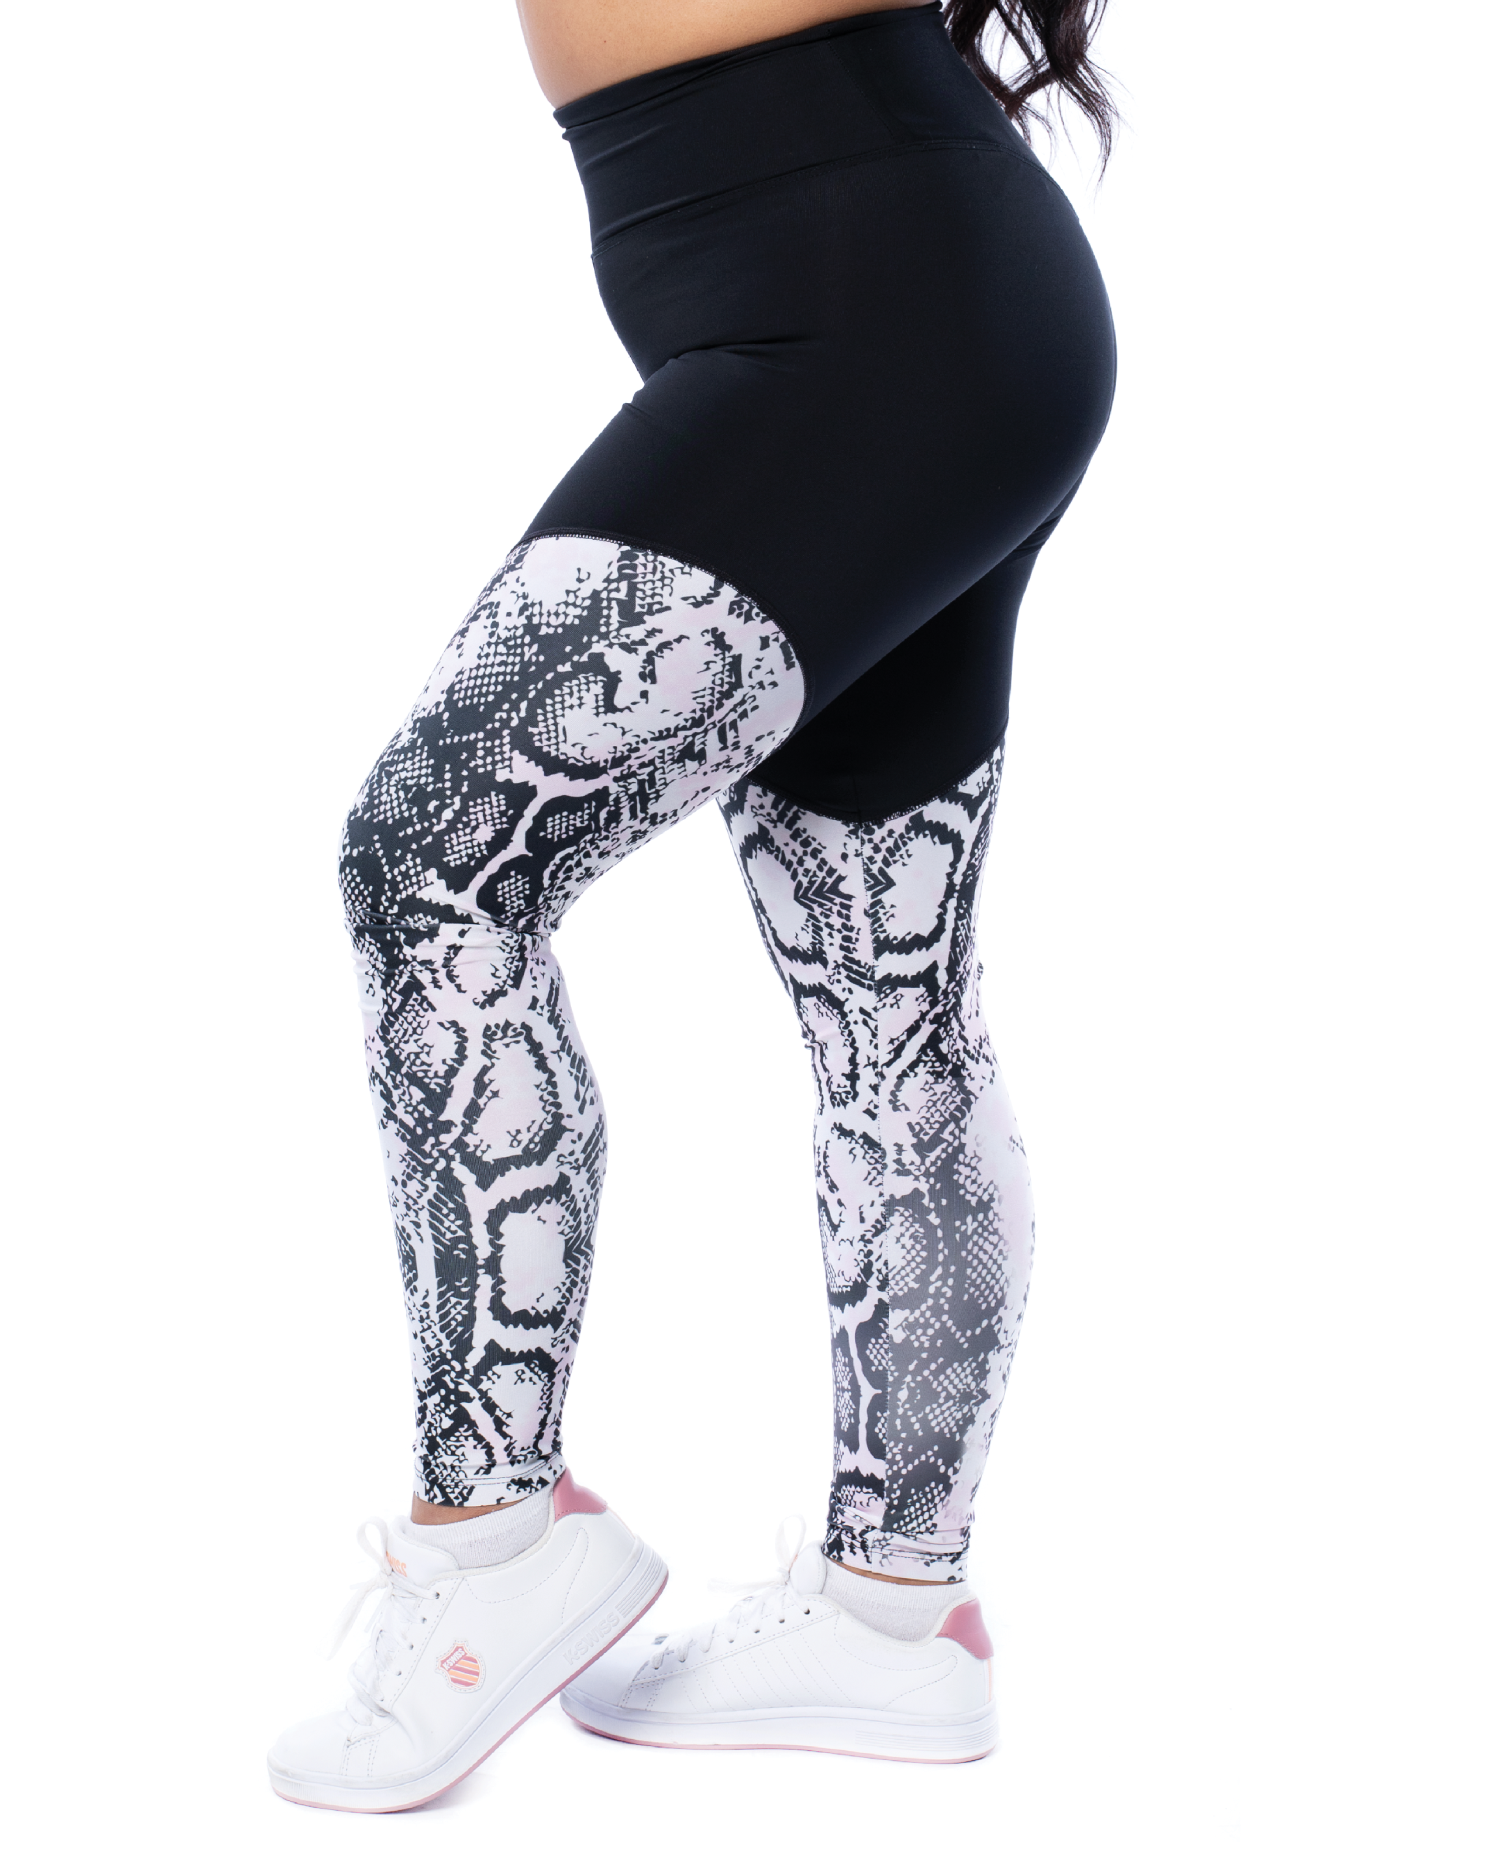 I want to remove pattern from the leggings. What is the best way to do it?  : r/photoshop